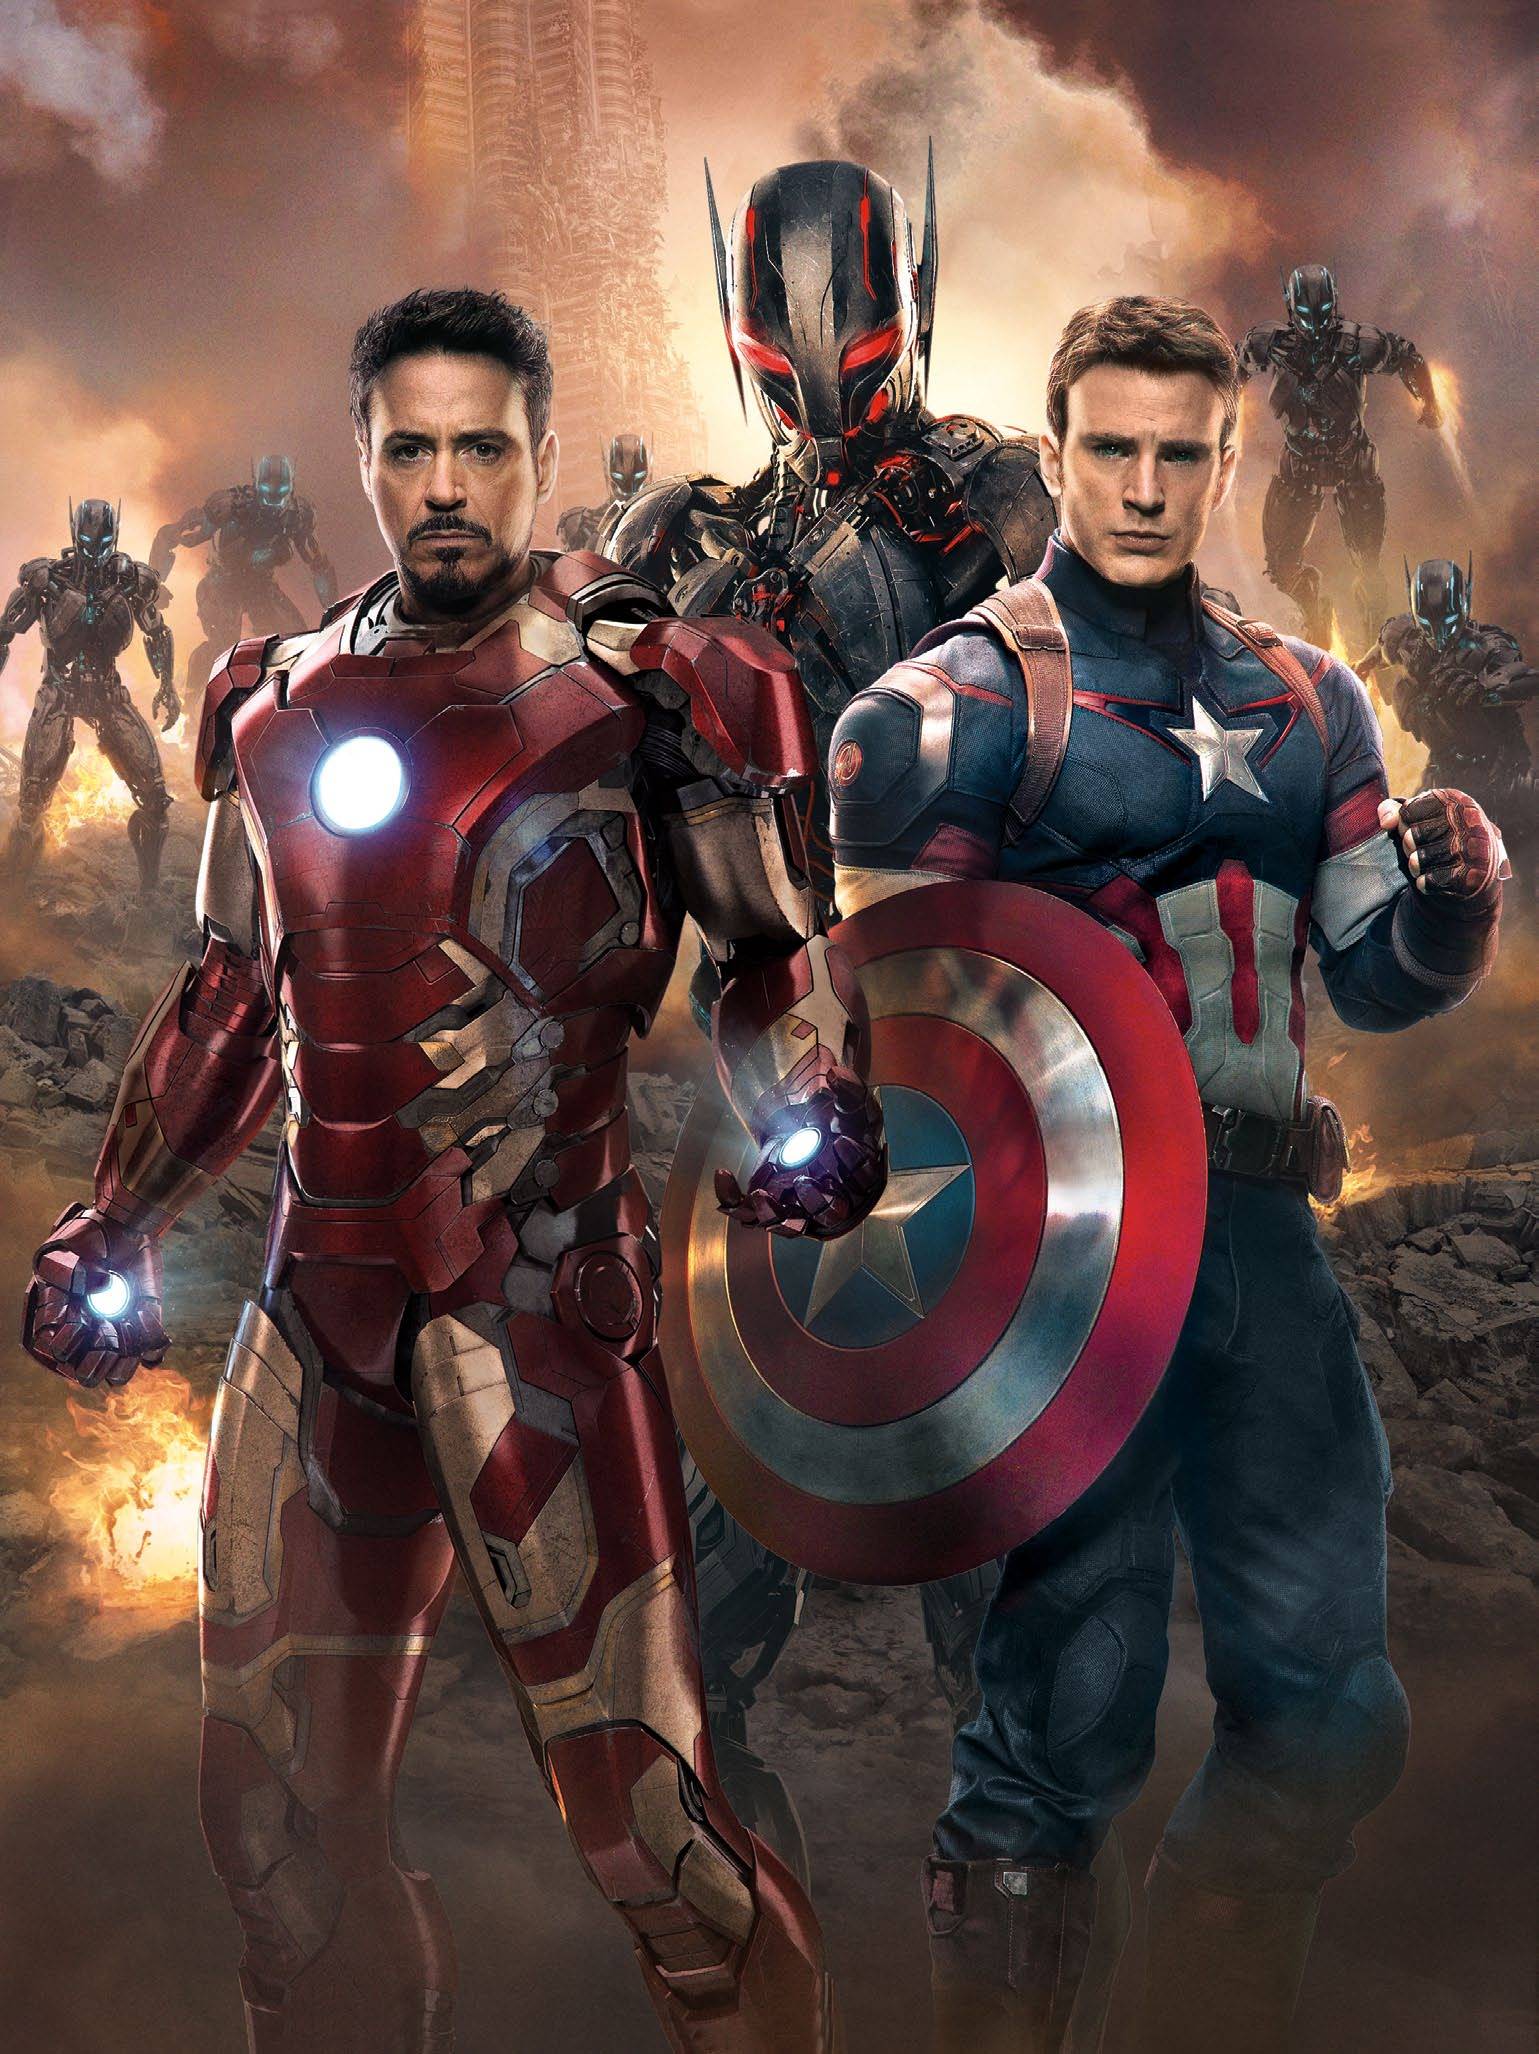 Avengers Android Wallpaper Free Avengers Android